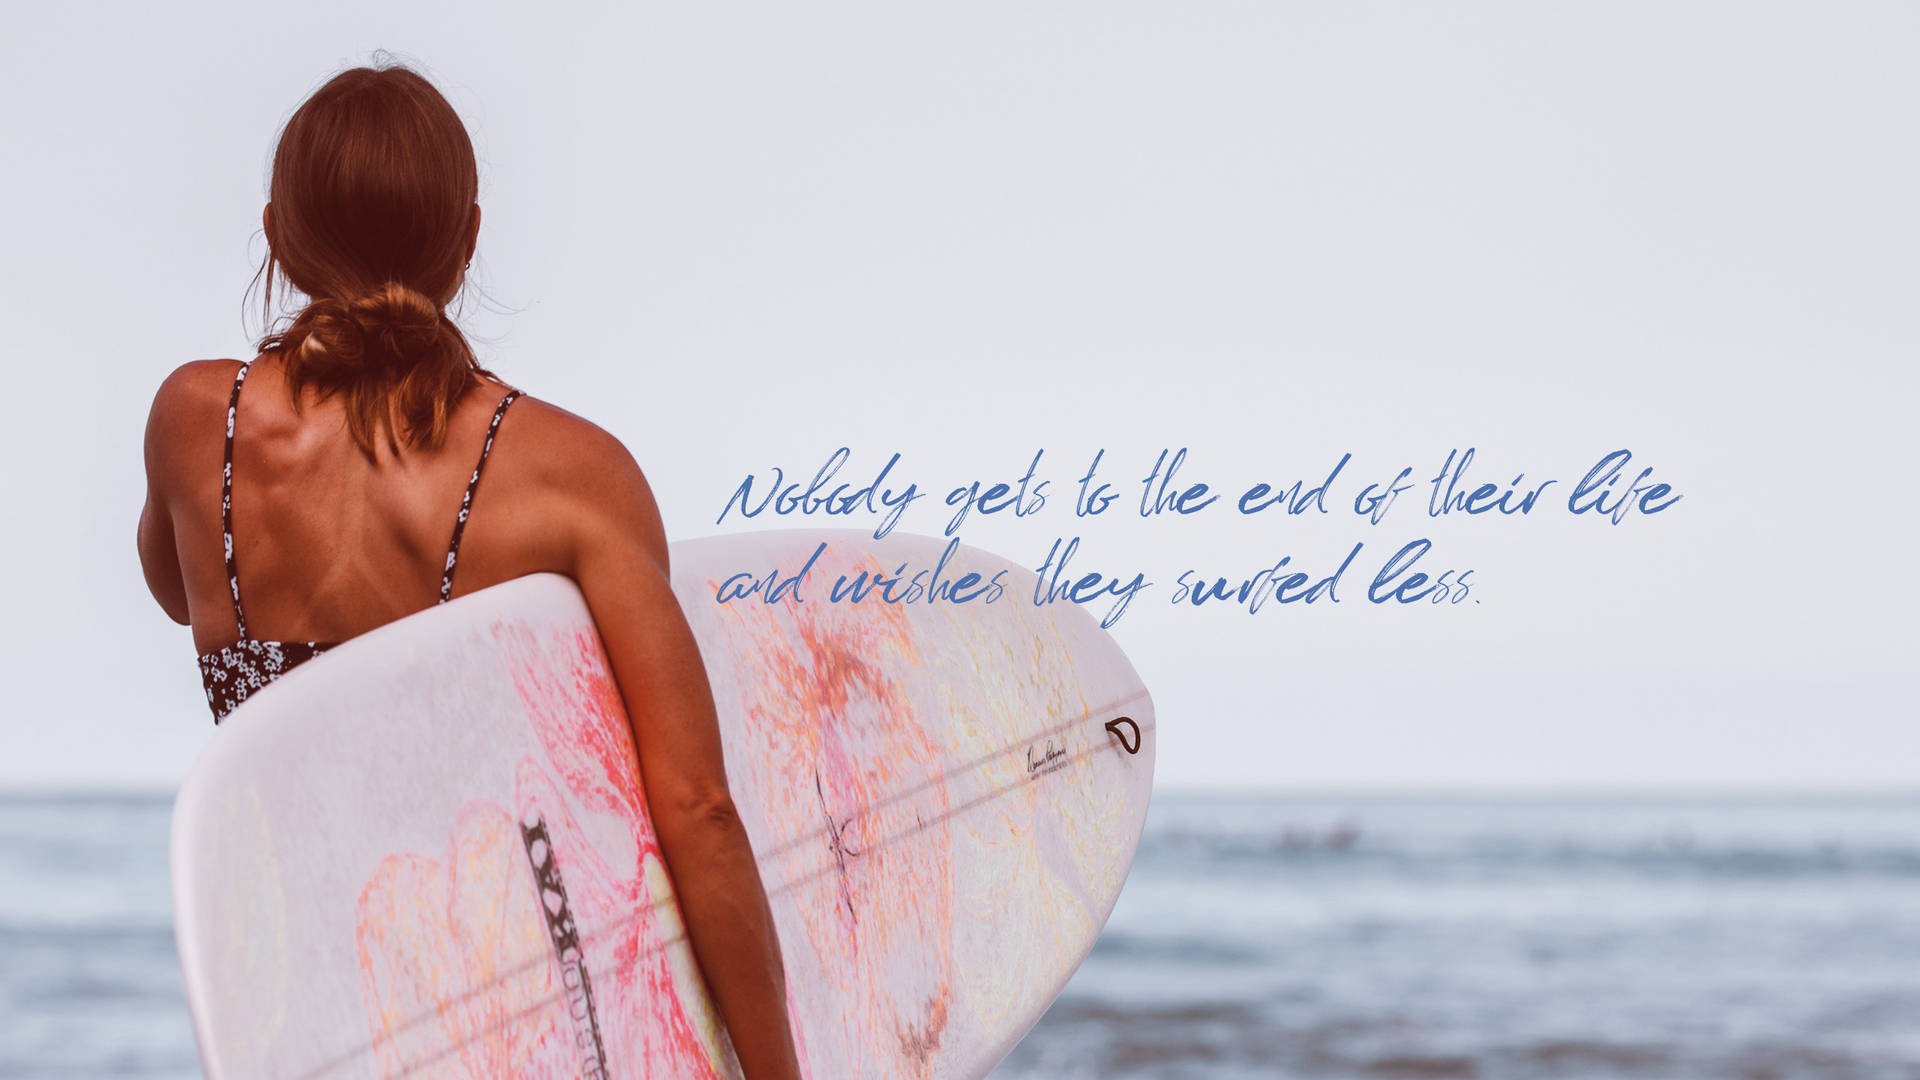 Surfing Less Quote Wallpaper